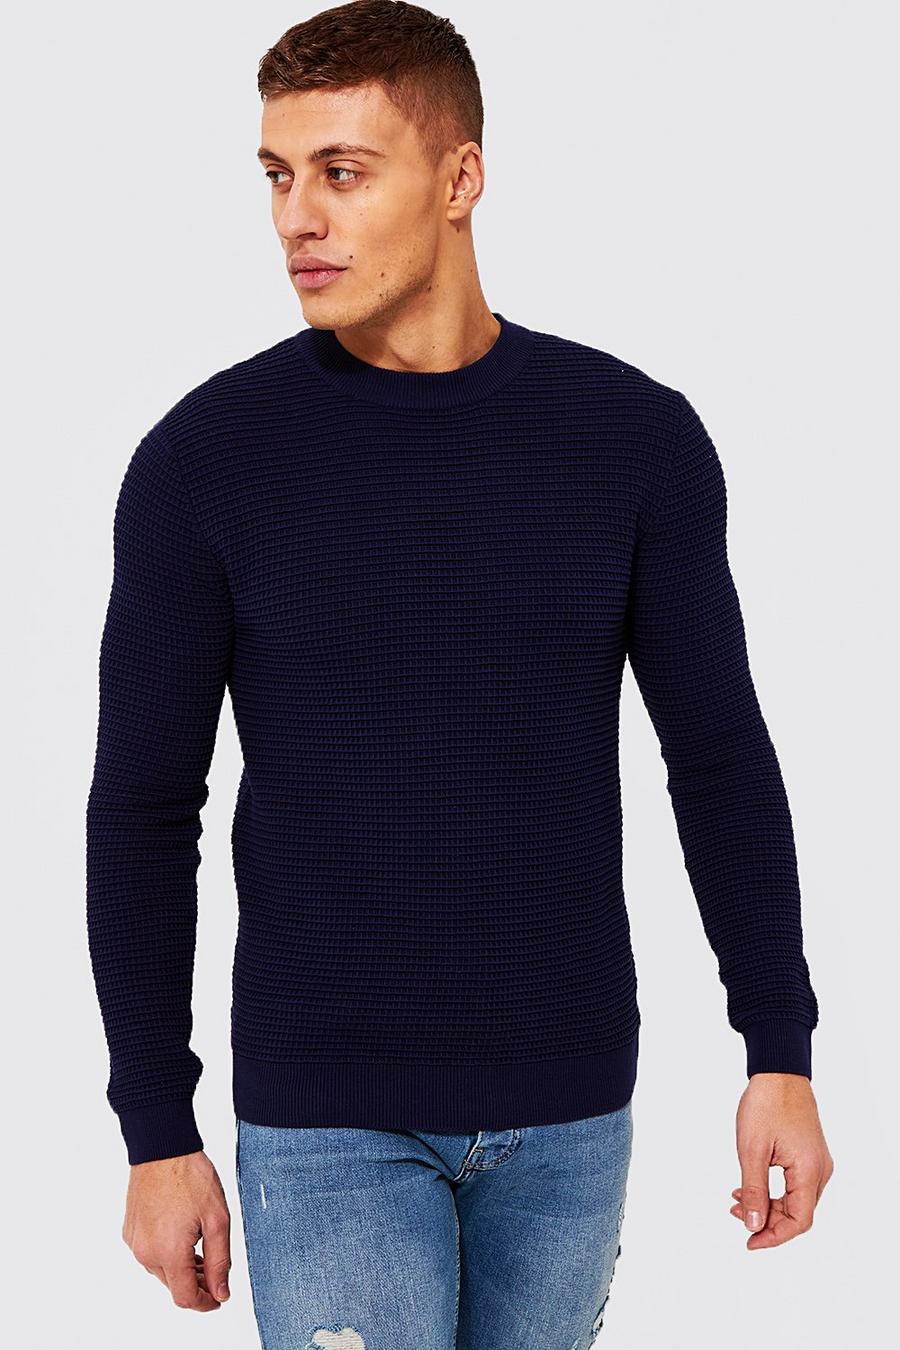 Muscle-Fit Pullover in Waffeloptik, Navy